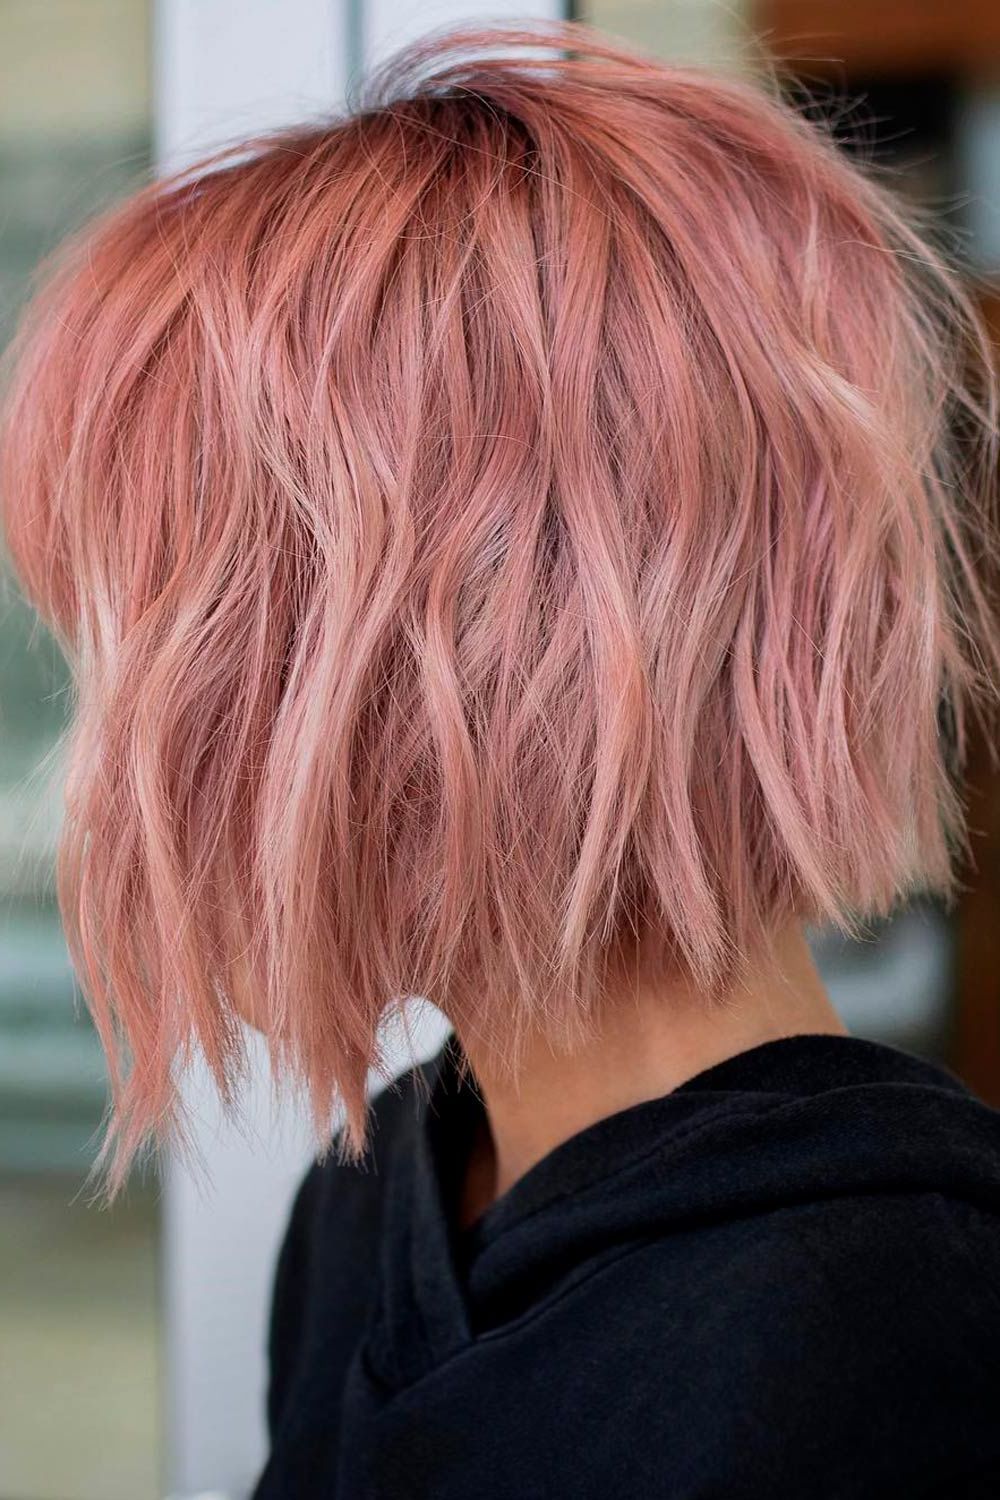 Widely Used Pink Balayage Haircuts For Wavy Lob For Untraditional Lob Haircut Ideas To Give A Try (View 5 of 20)